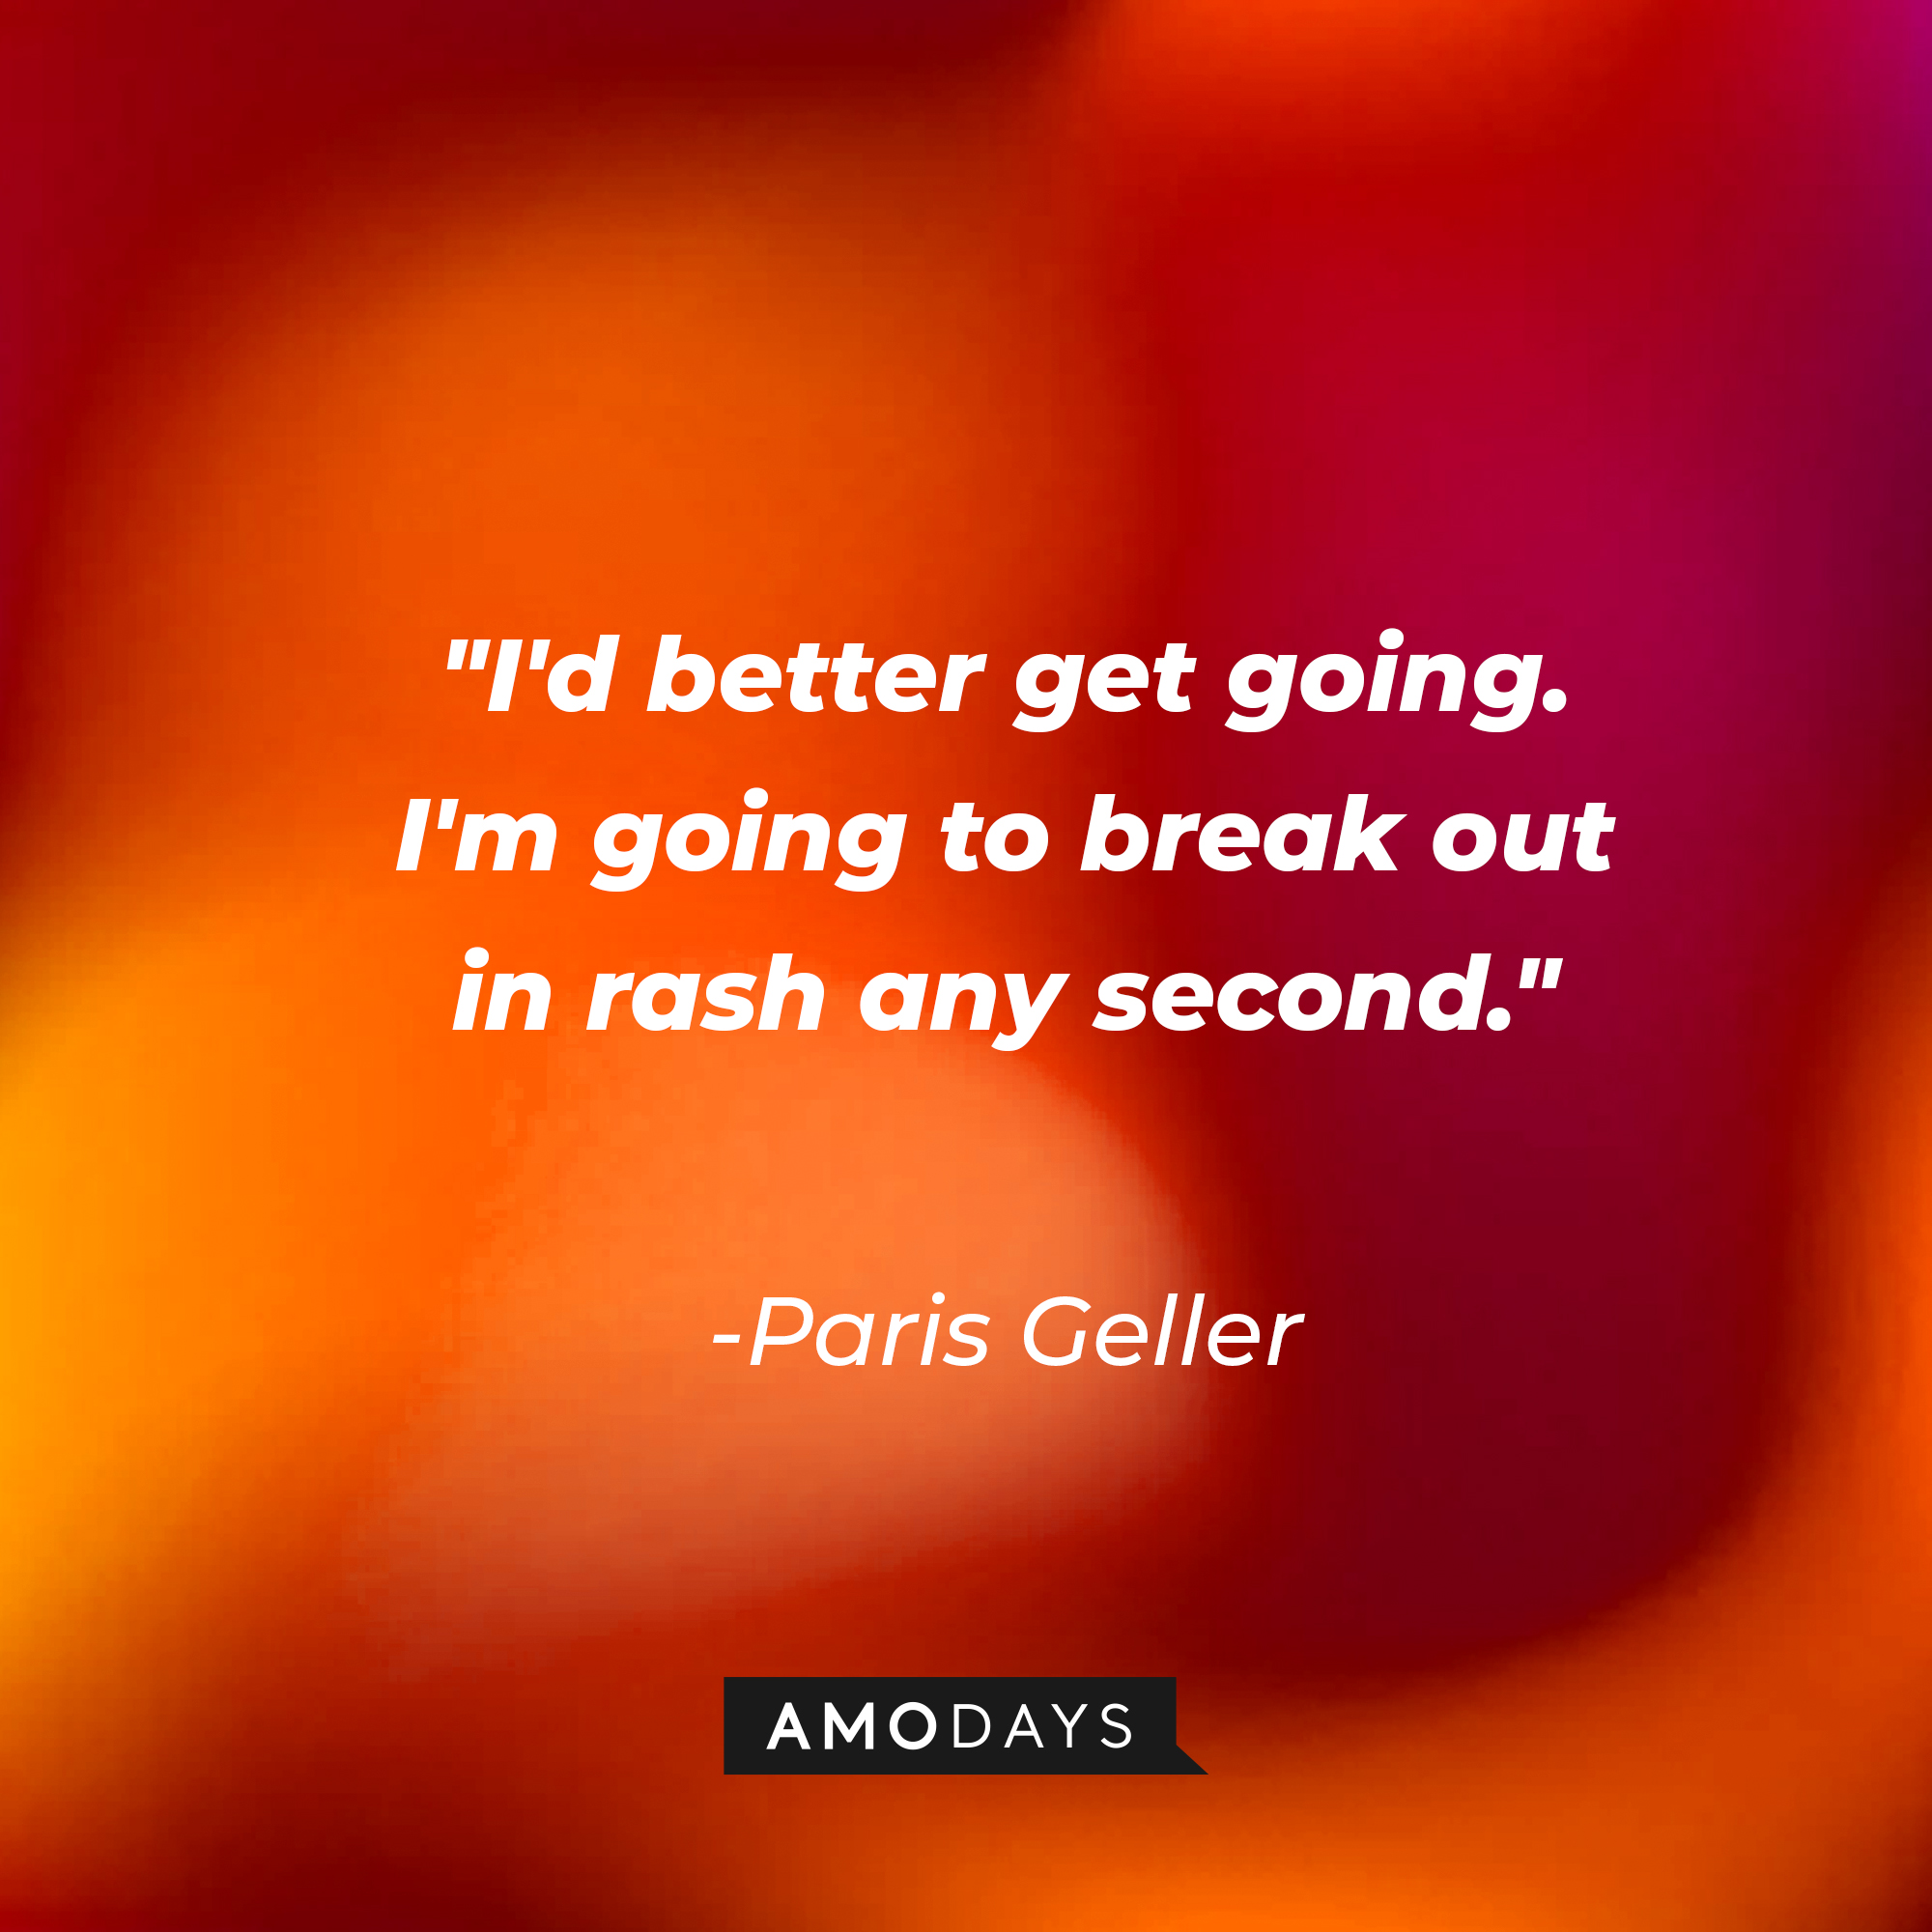 Paris Geller’s quote: “I'd better get going. I'm going to break out in rash any second.” | Source: AmoDays